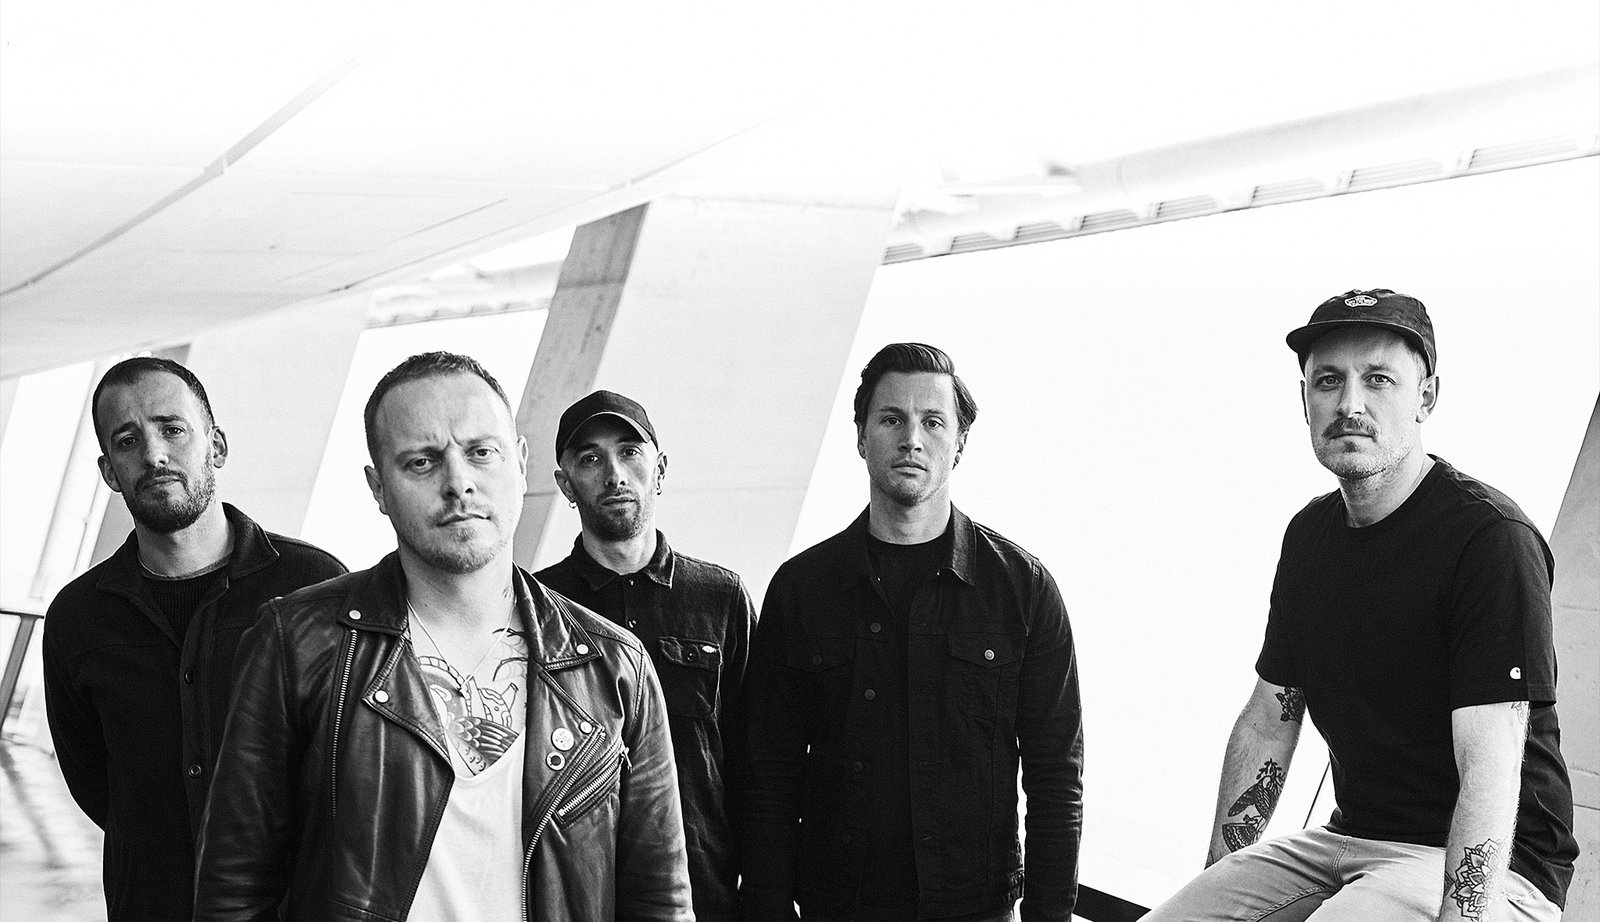 Architects – “the classic symptoms of a broken spirit”